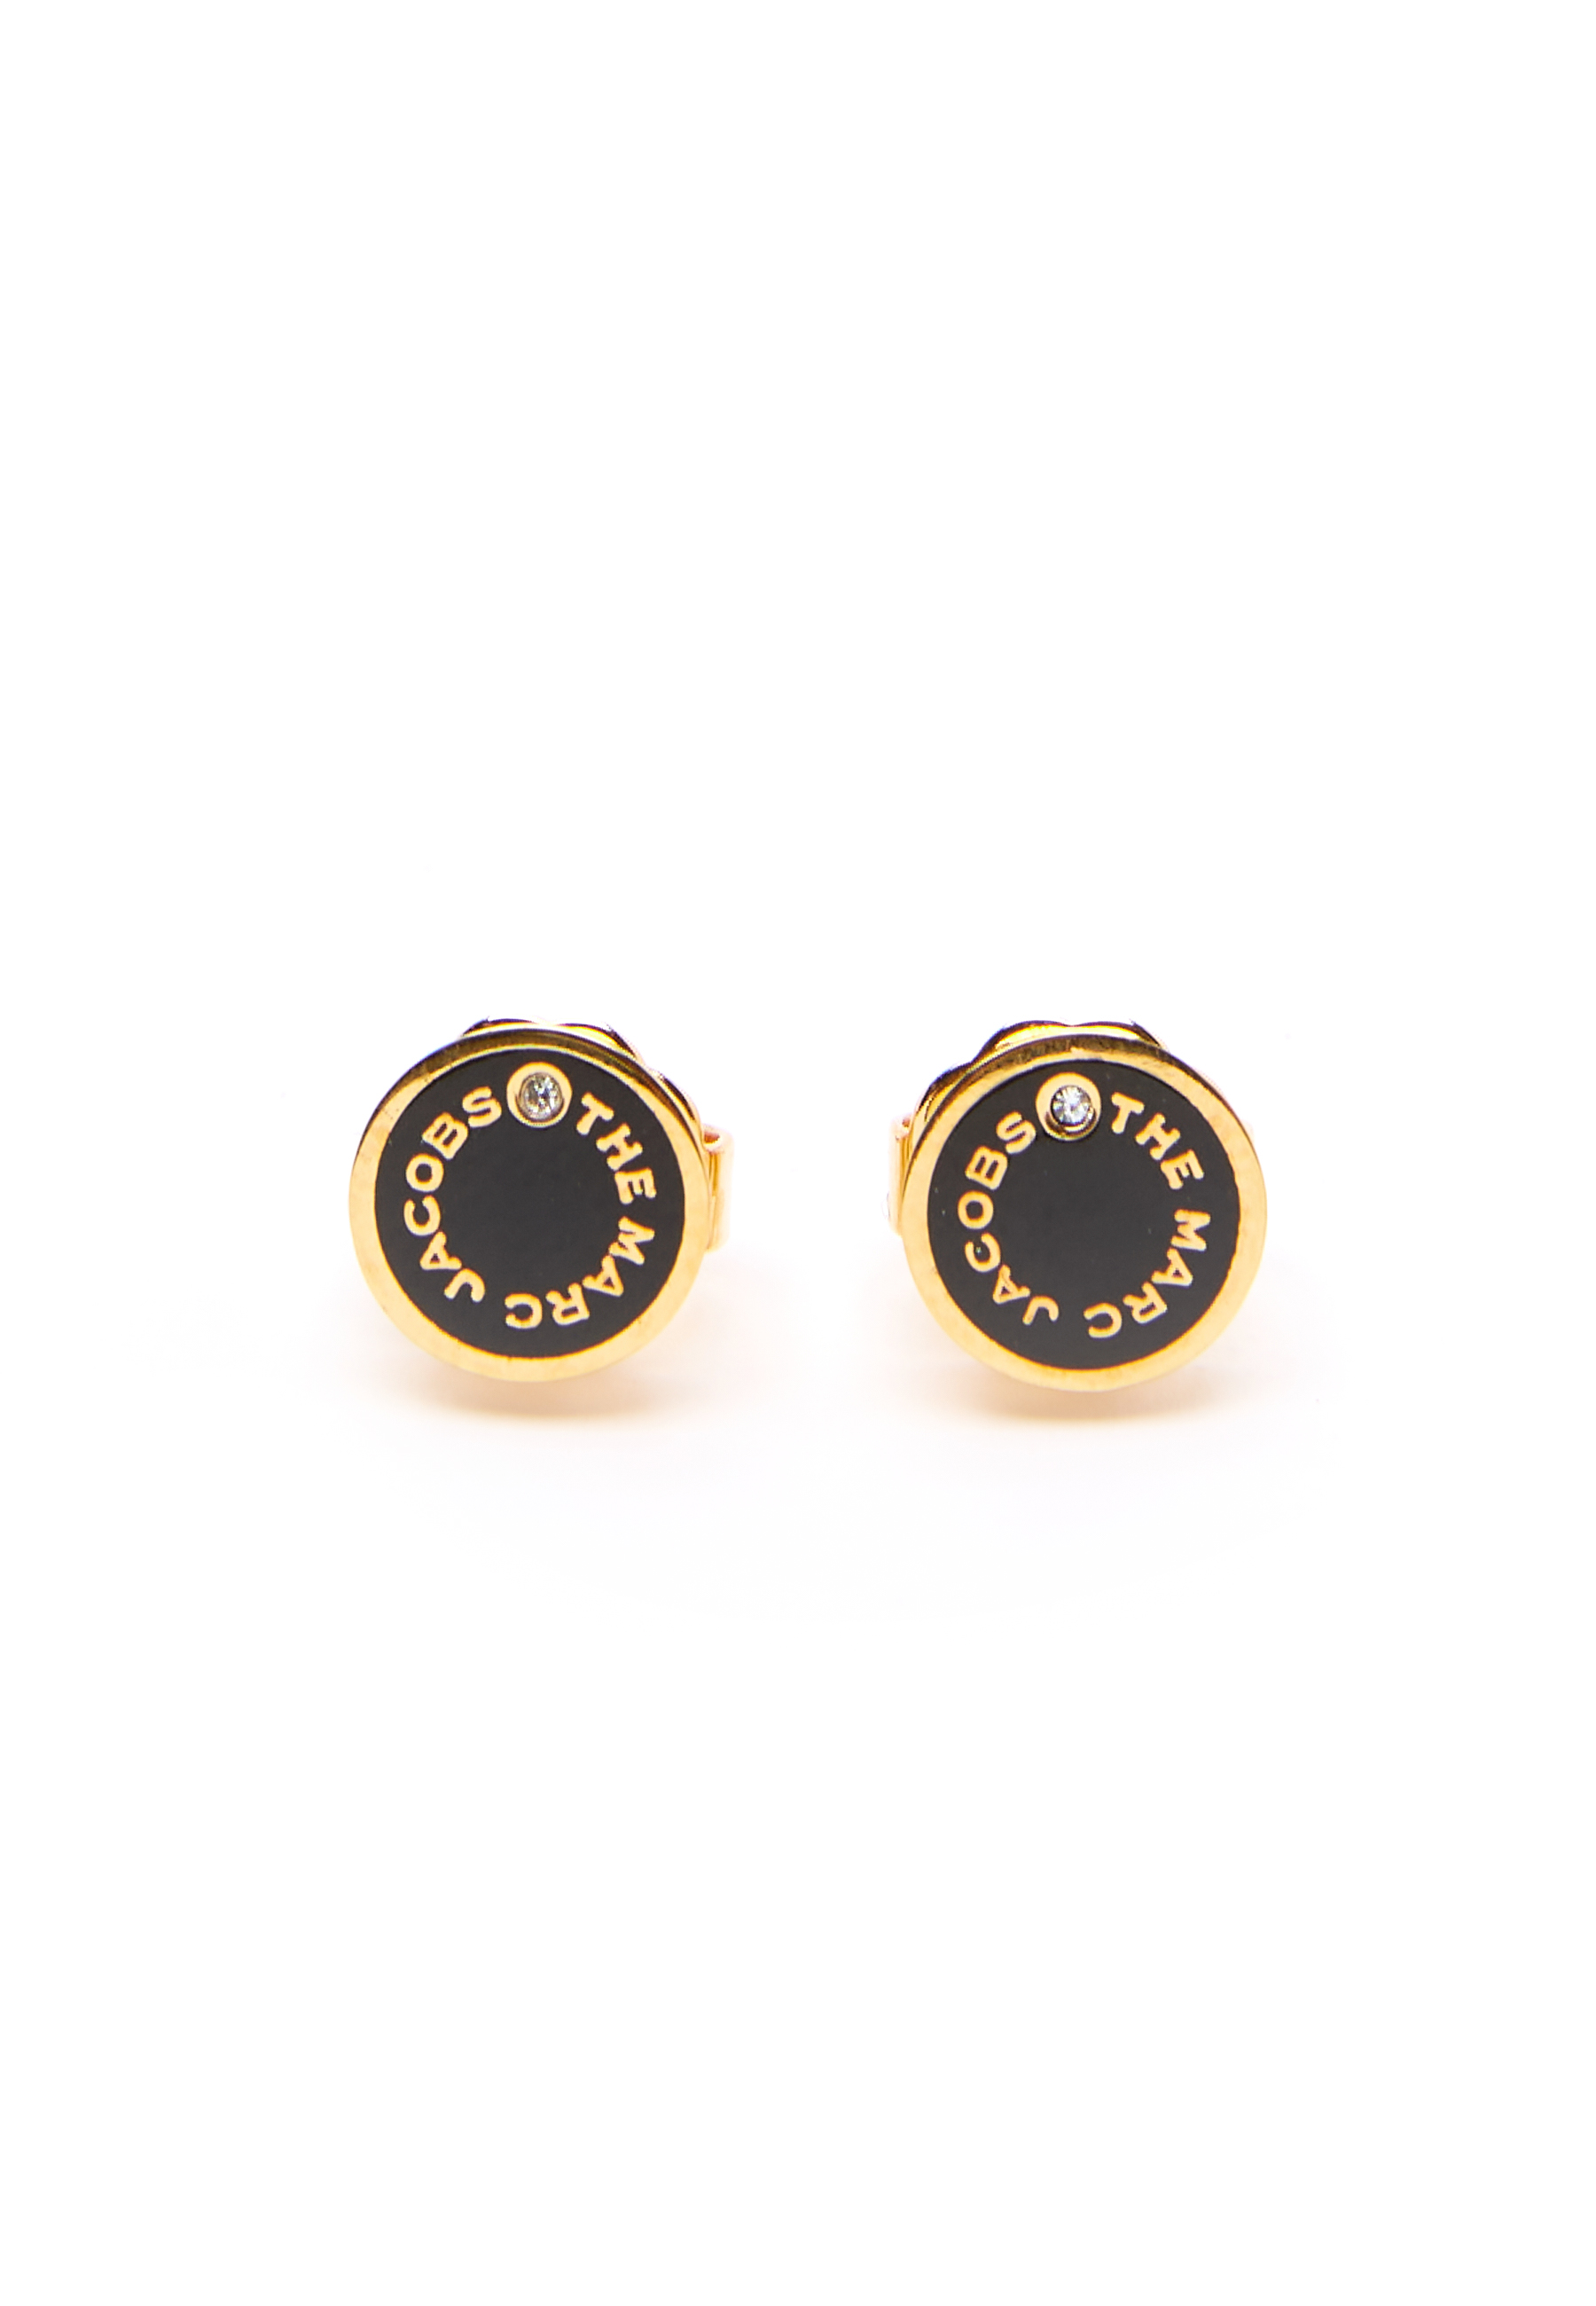 Male controller Modtager Marc Jacobs (THE) The Medallion Studs Earrings 001 Black/Gold - Bubbleroom